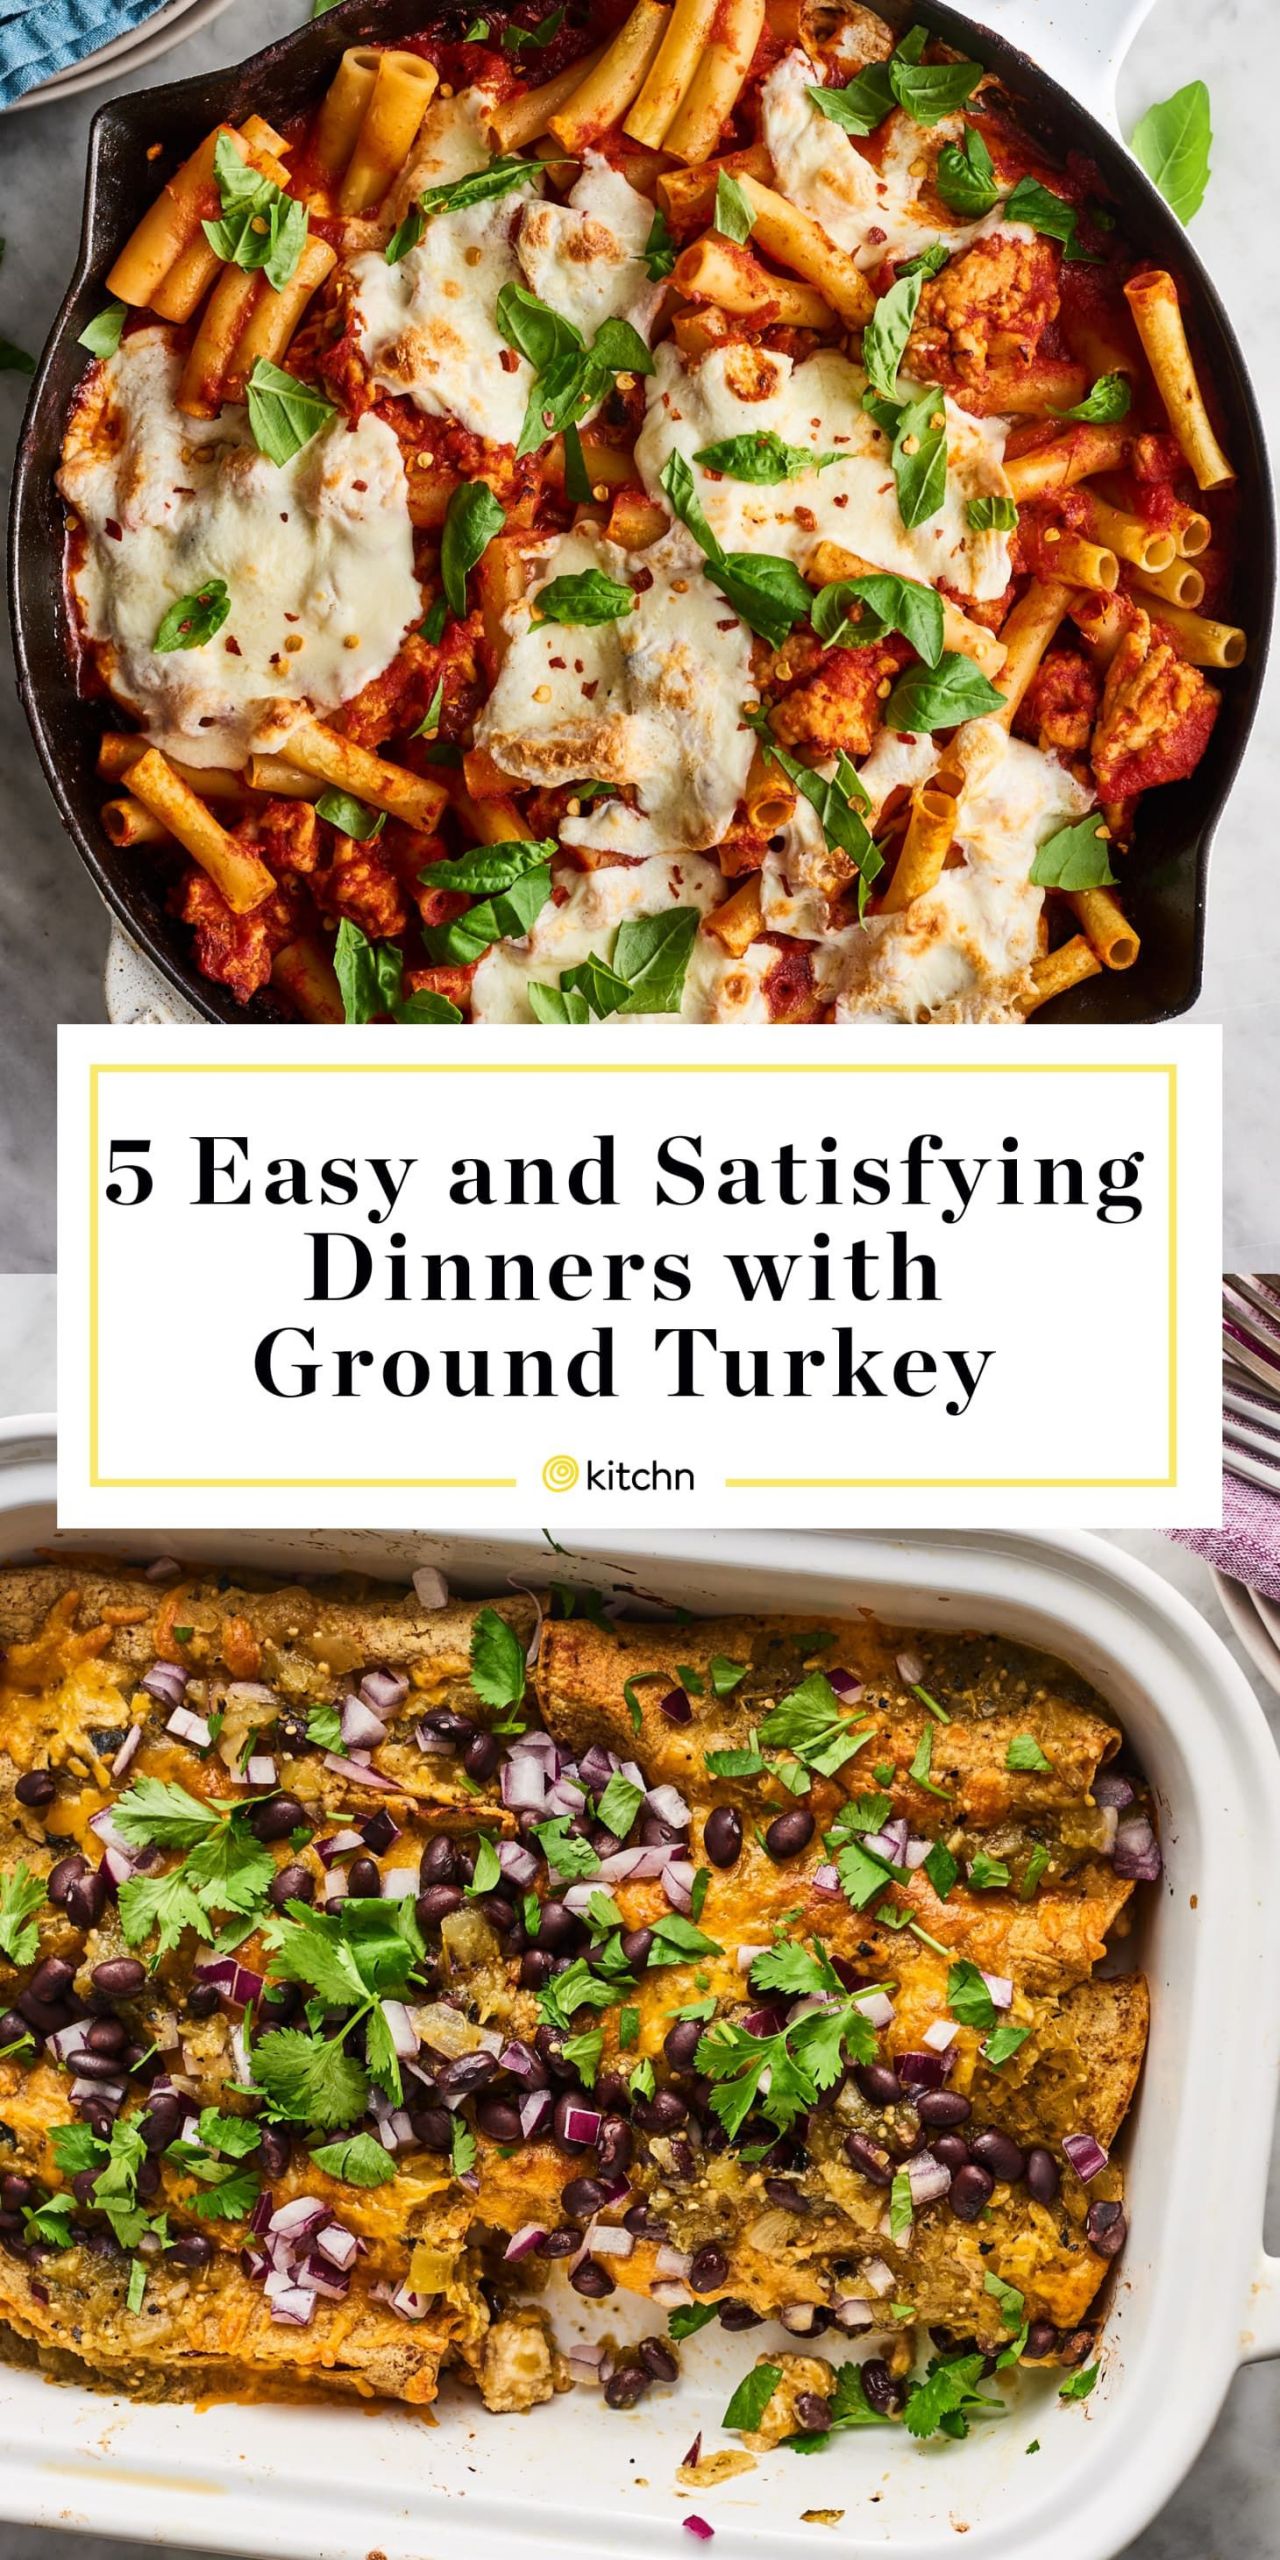 Quick Meals With Ground Turkey
 5 Quick Dinners That Start with a Pound of Ground Turkey